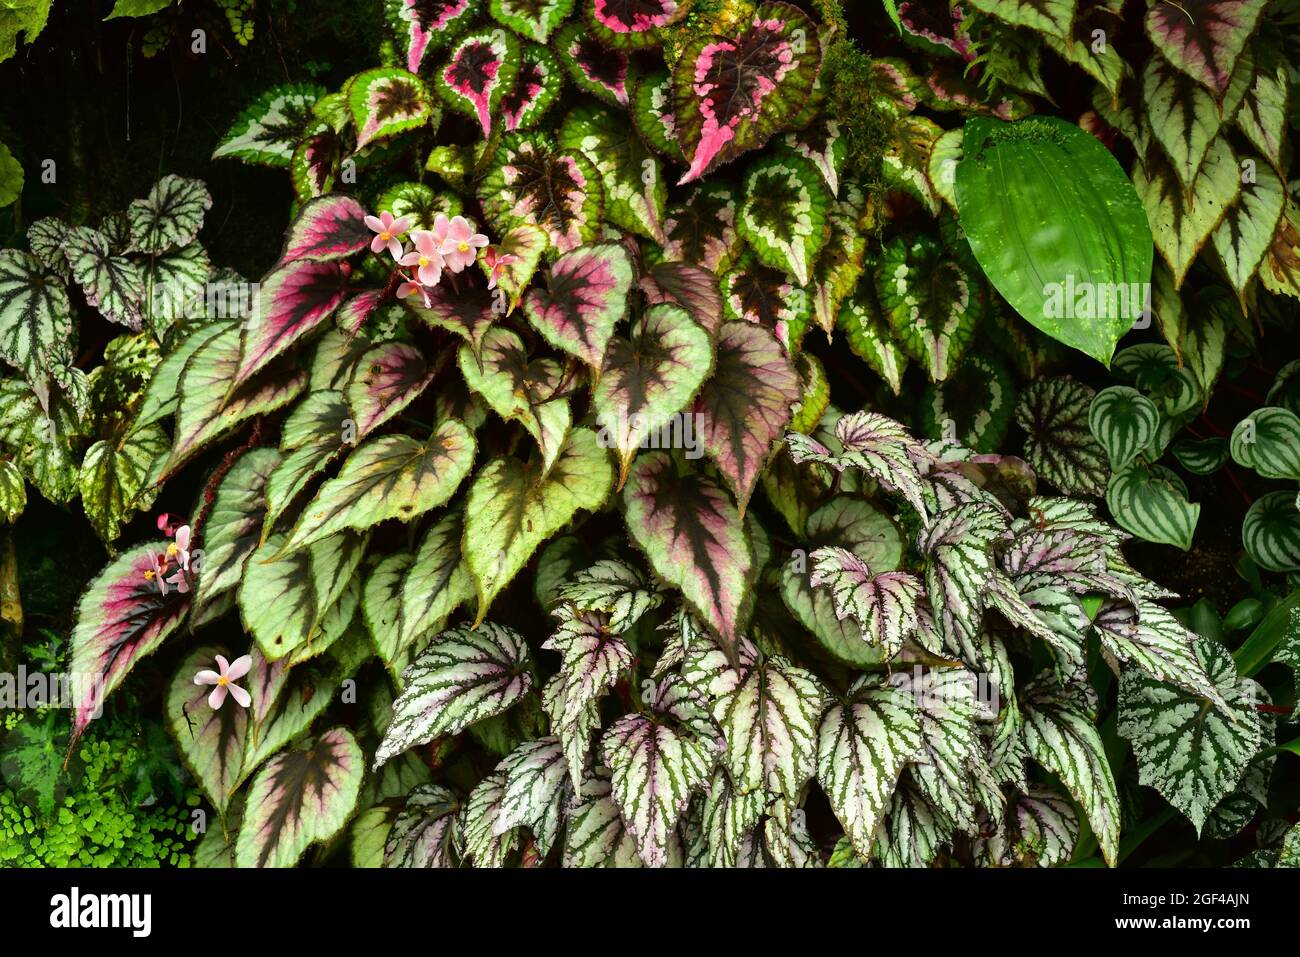 Begonia rex is an ornamental perennial plant native to tropical Asia. Stock Photo